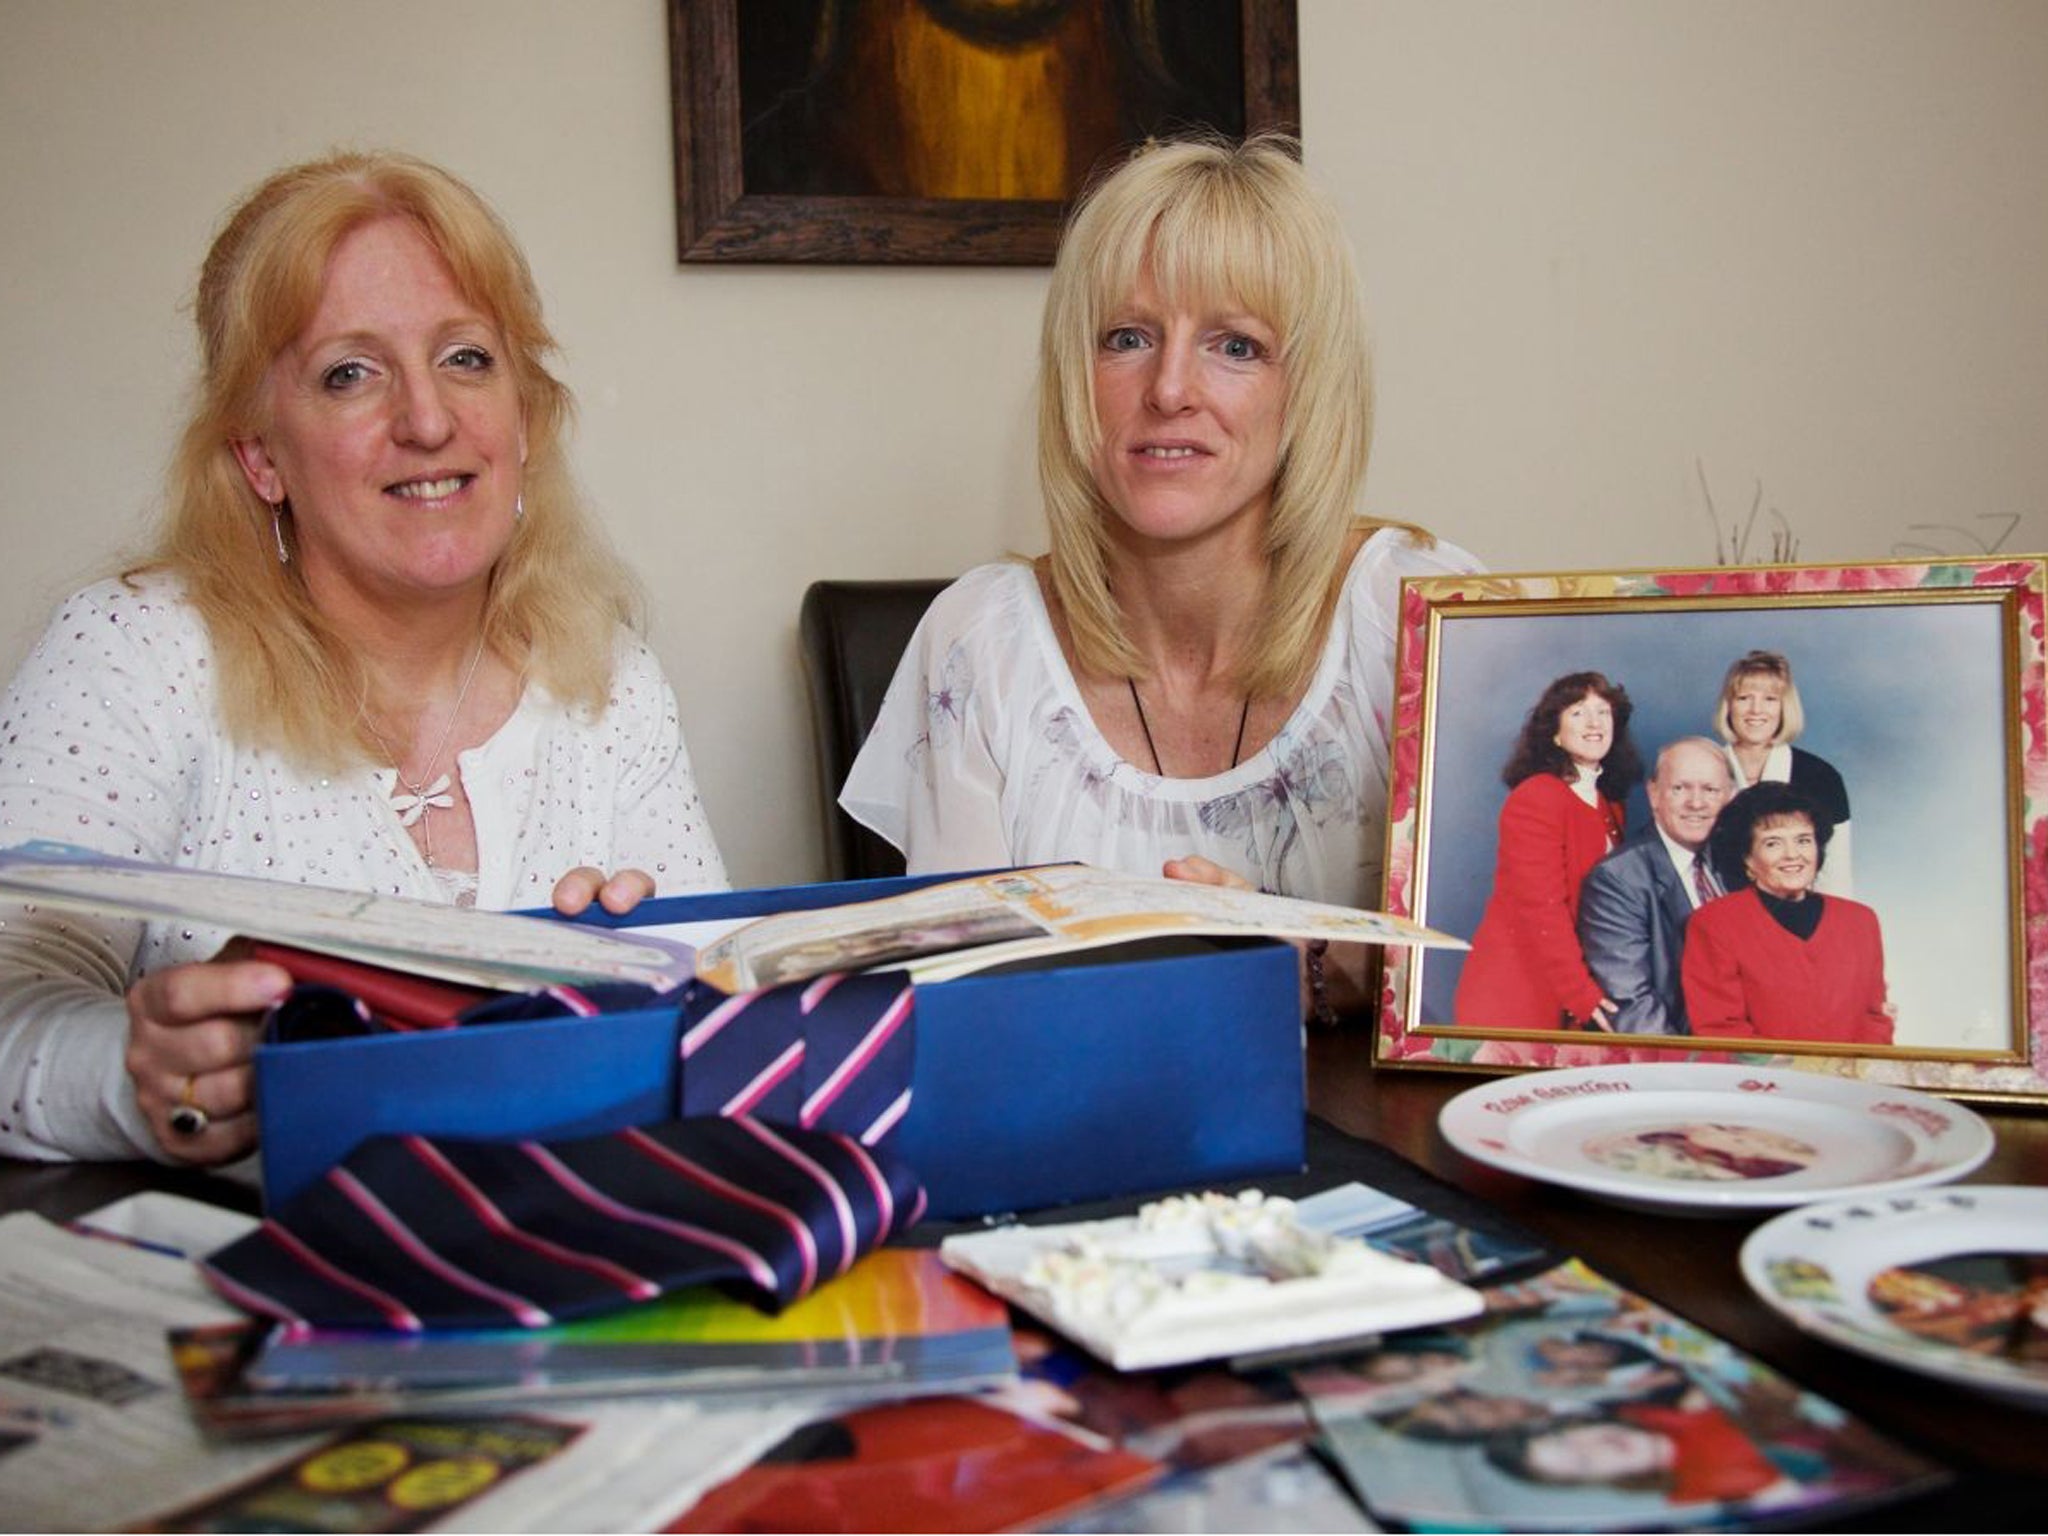 Nicky Locking, left, and Lisa Young, daughters of the Glovers, beside a picture of the family in 1994